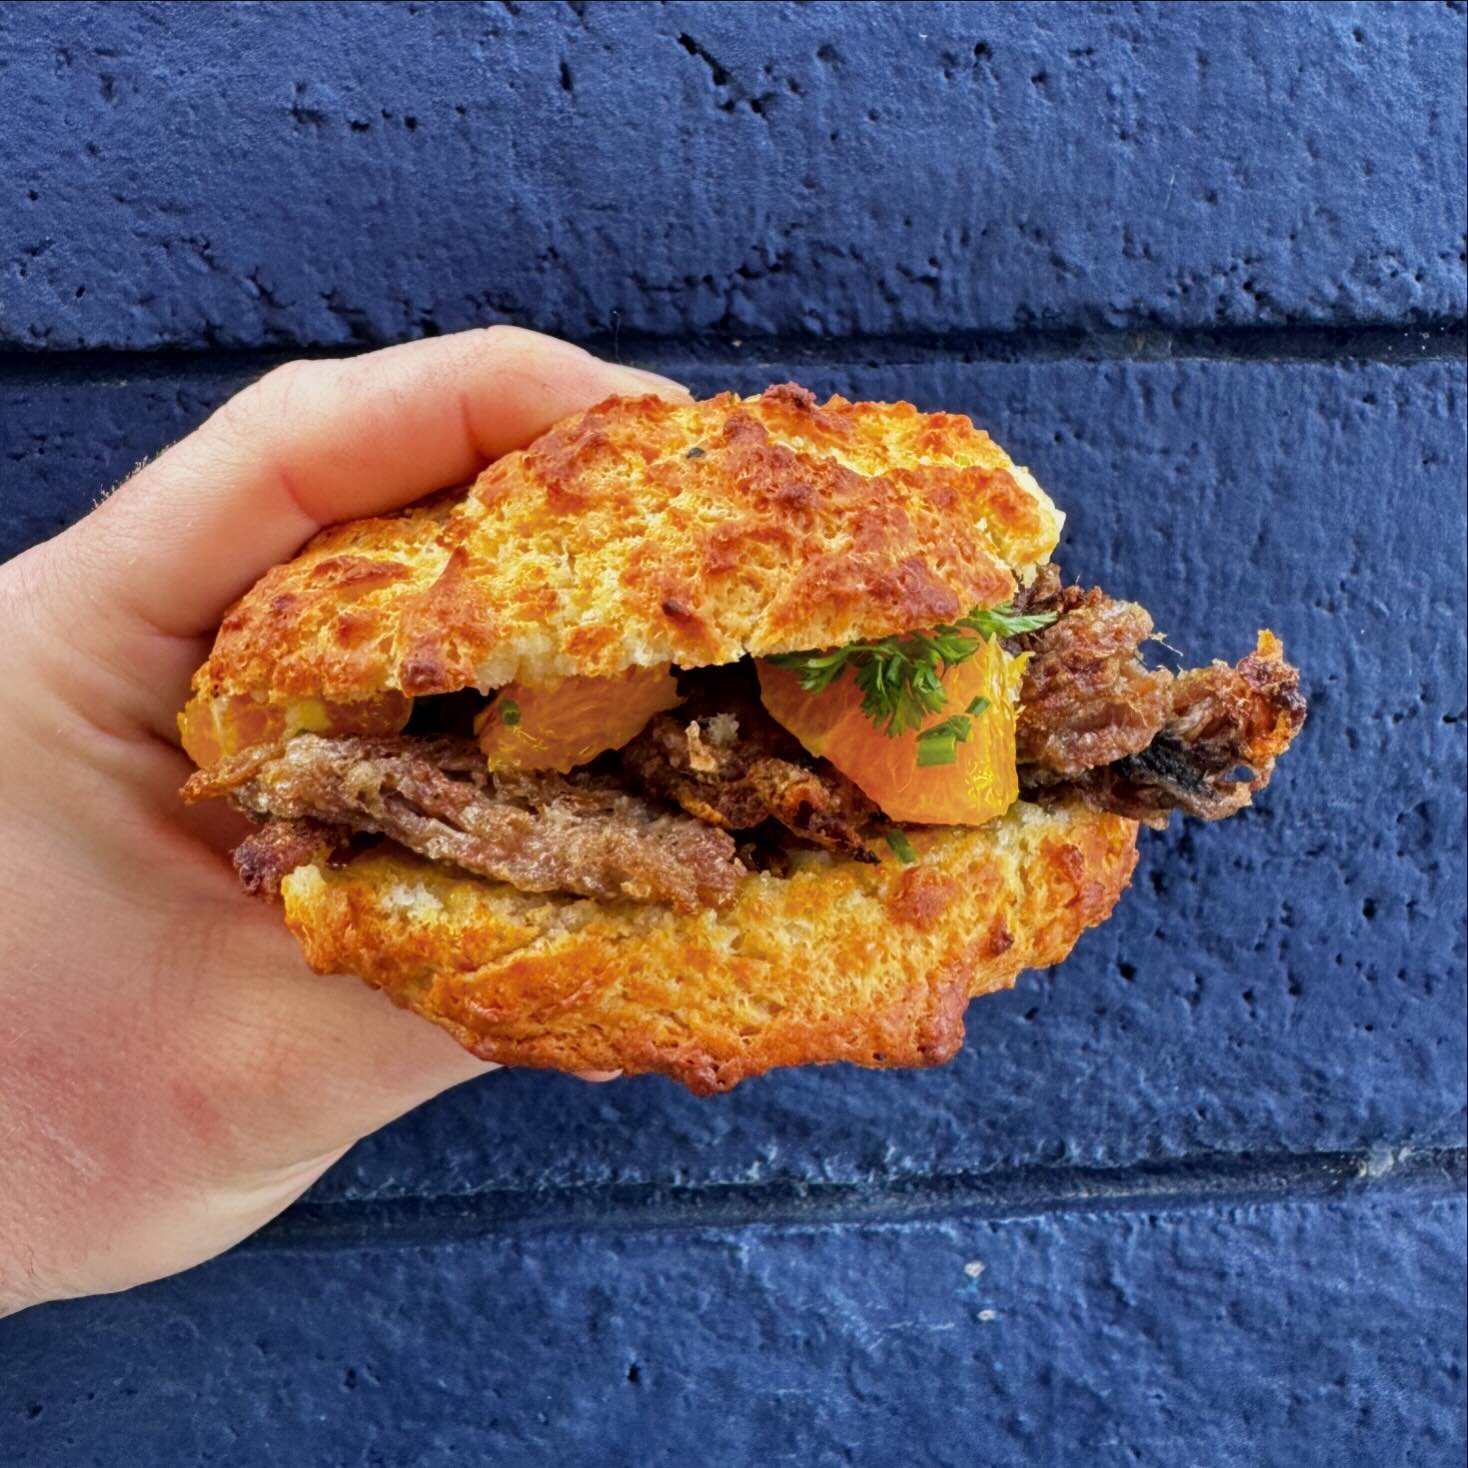 The carnitas baller biscuit is here. ⚡️⚡️⚡️